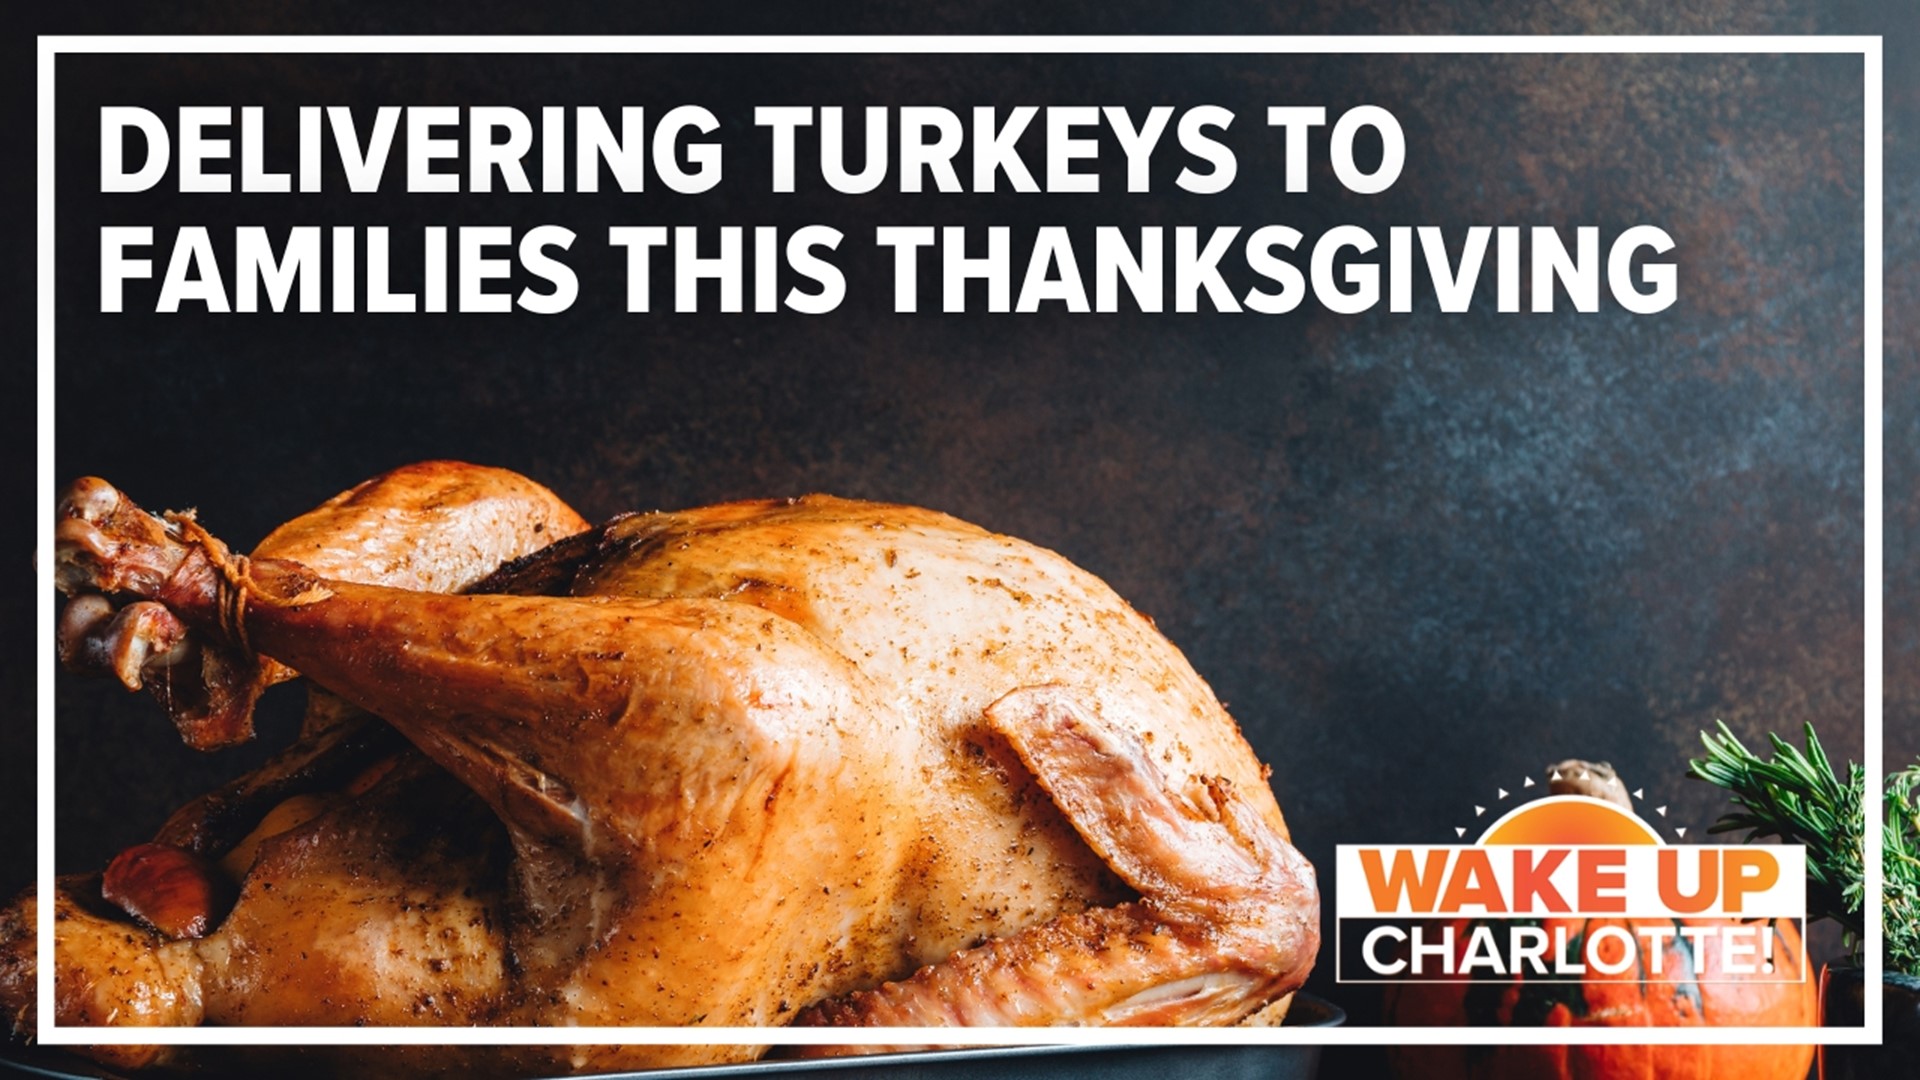 On Wednesday, volunteers will load their cars with Thanksgiving turkeys to deliver directly to the homes of clients through the Loaves & Fishes.